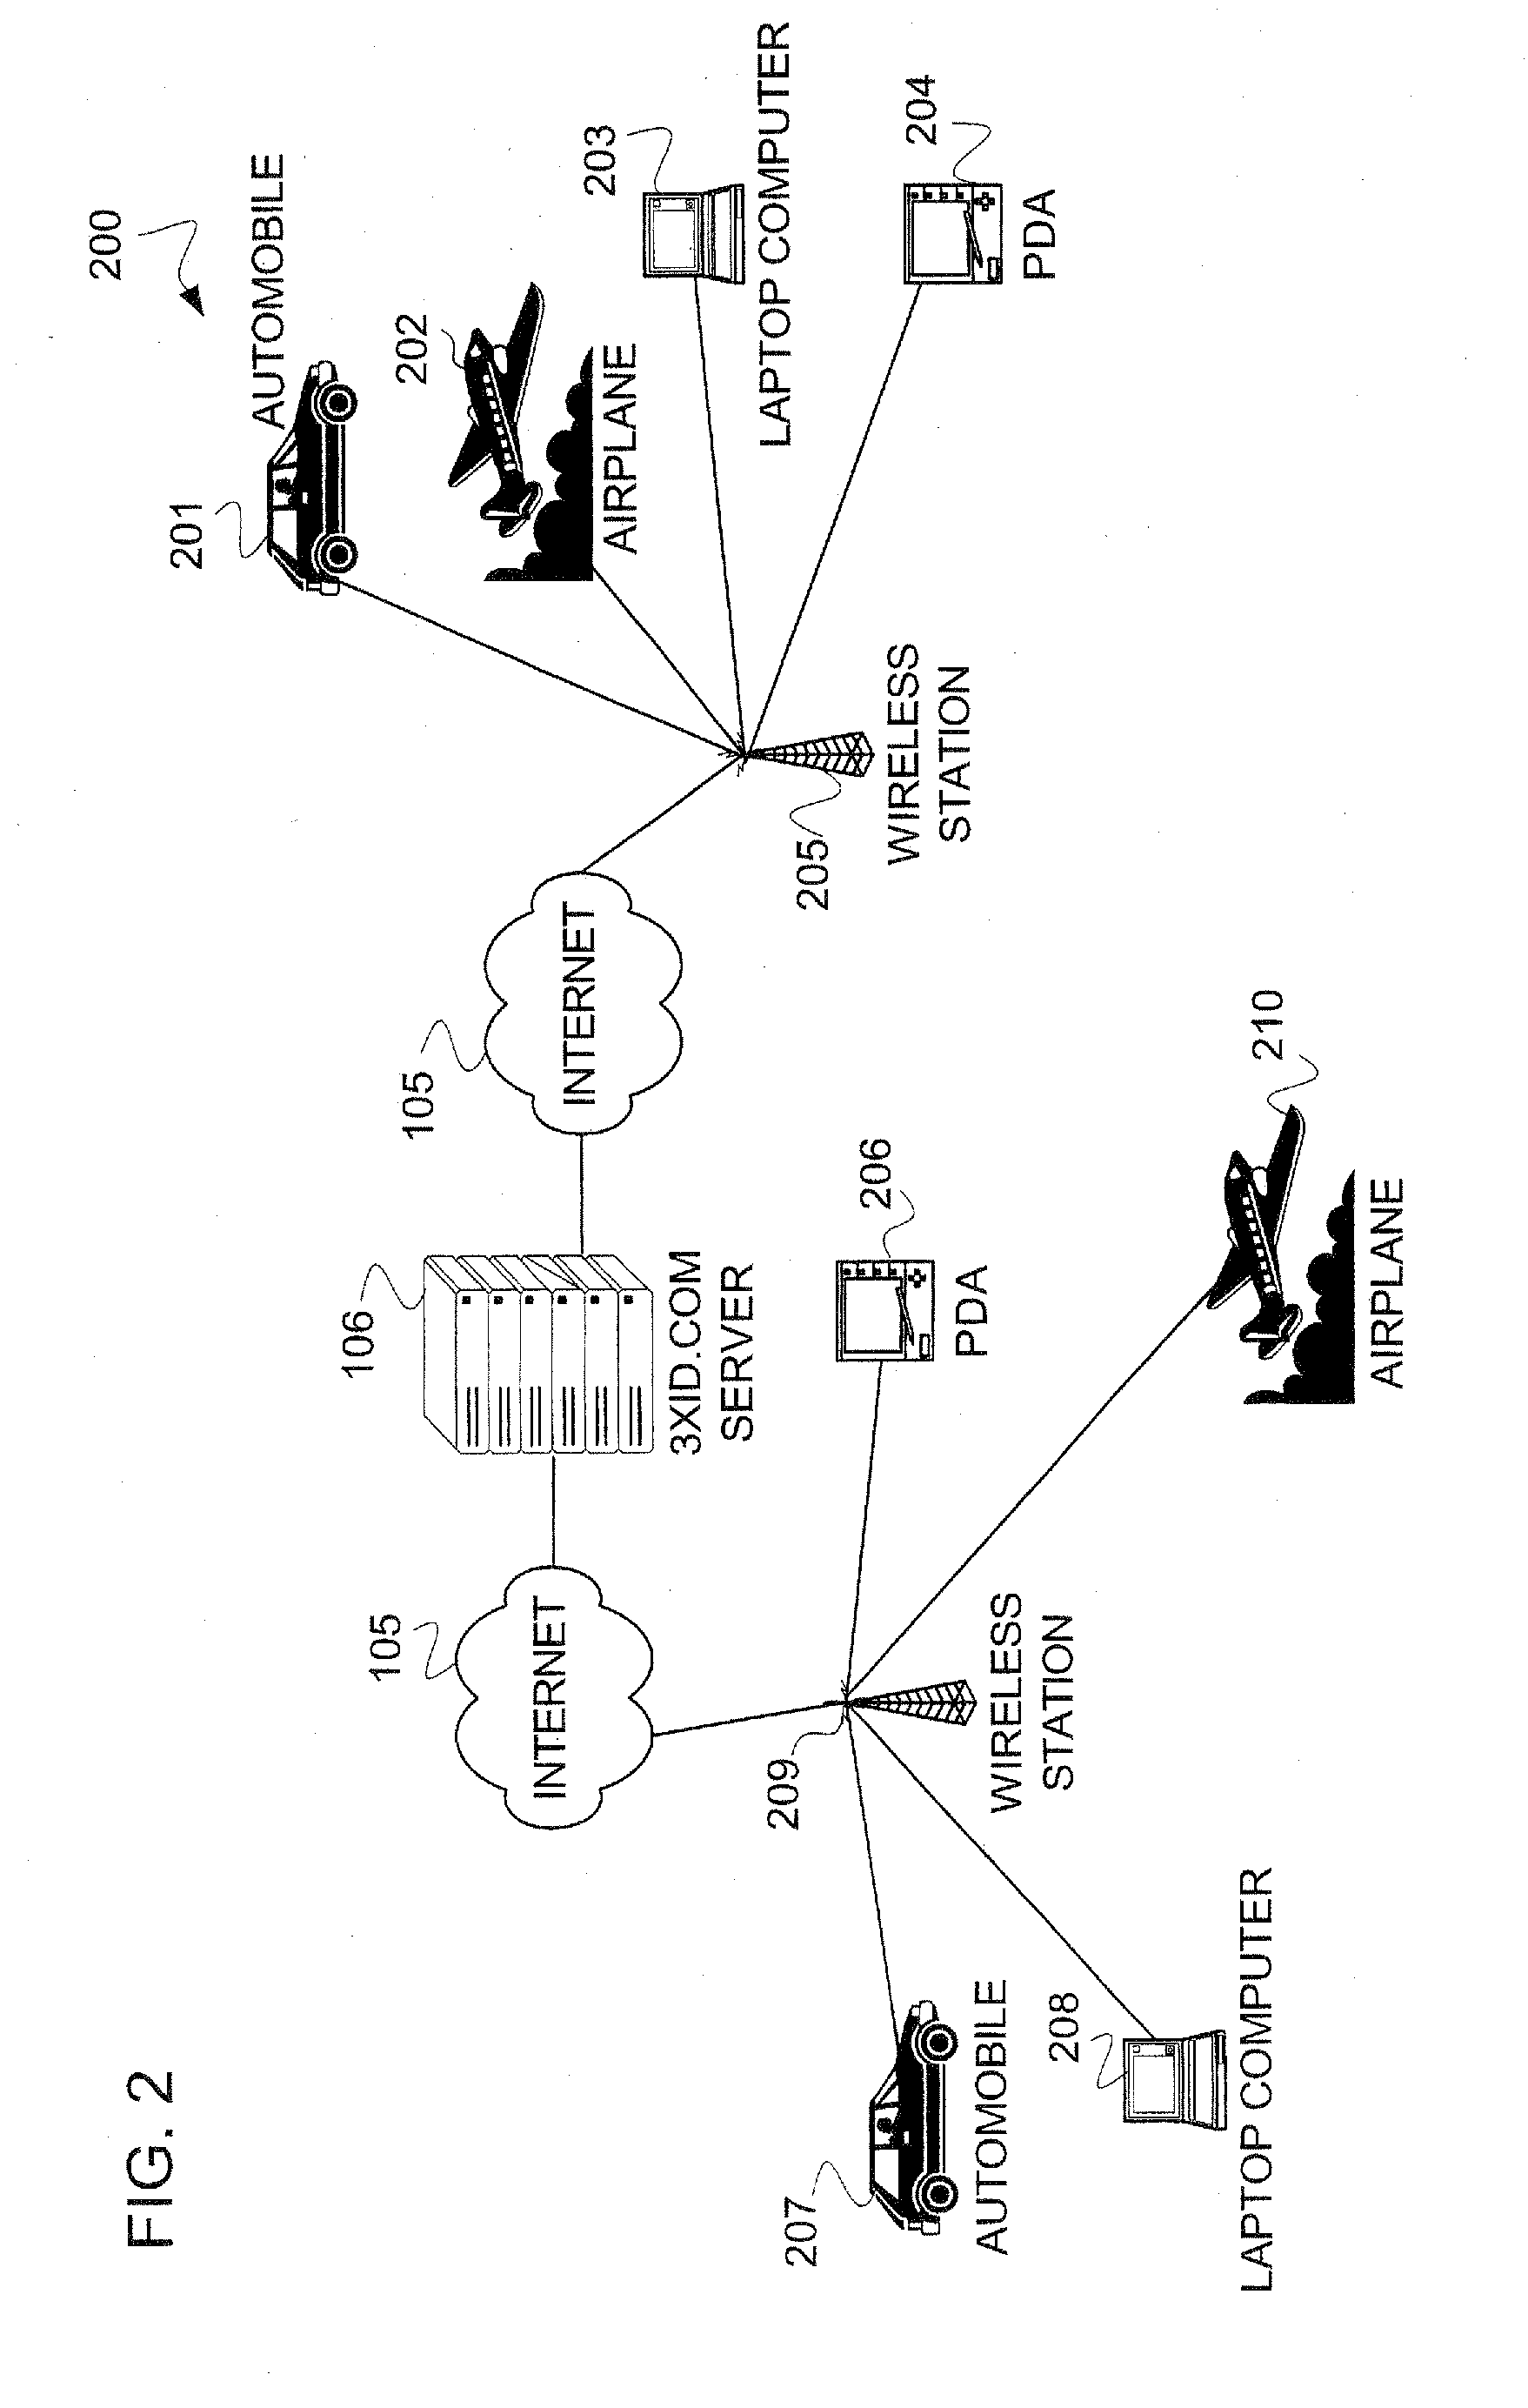 System and method for verifying the identity of a sender of electronic mail and preventing unsolicited bulk email